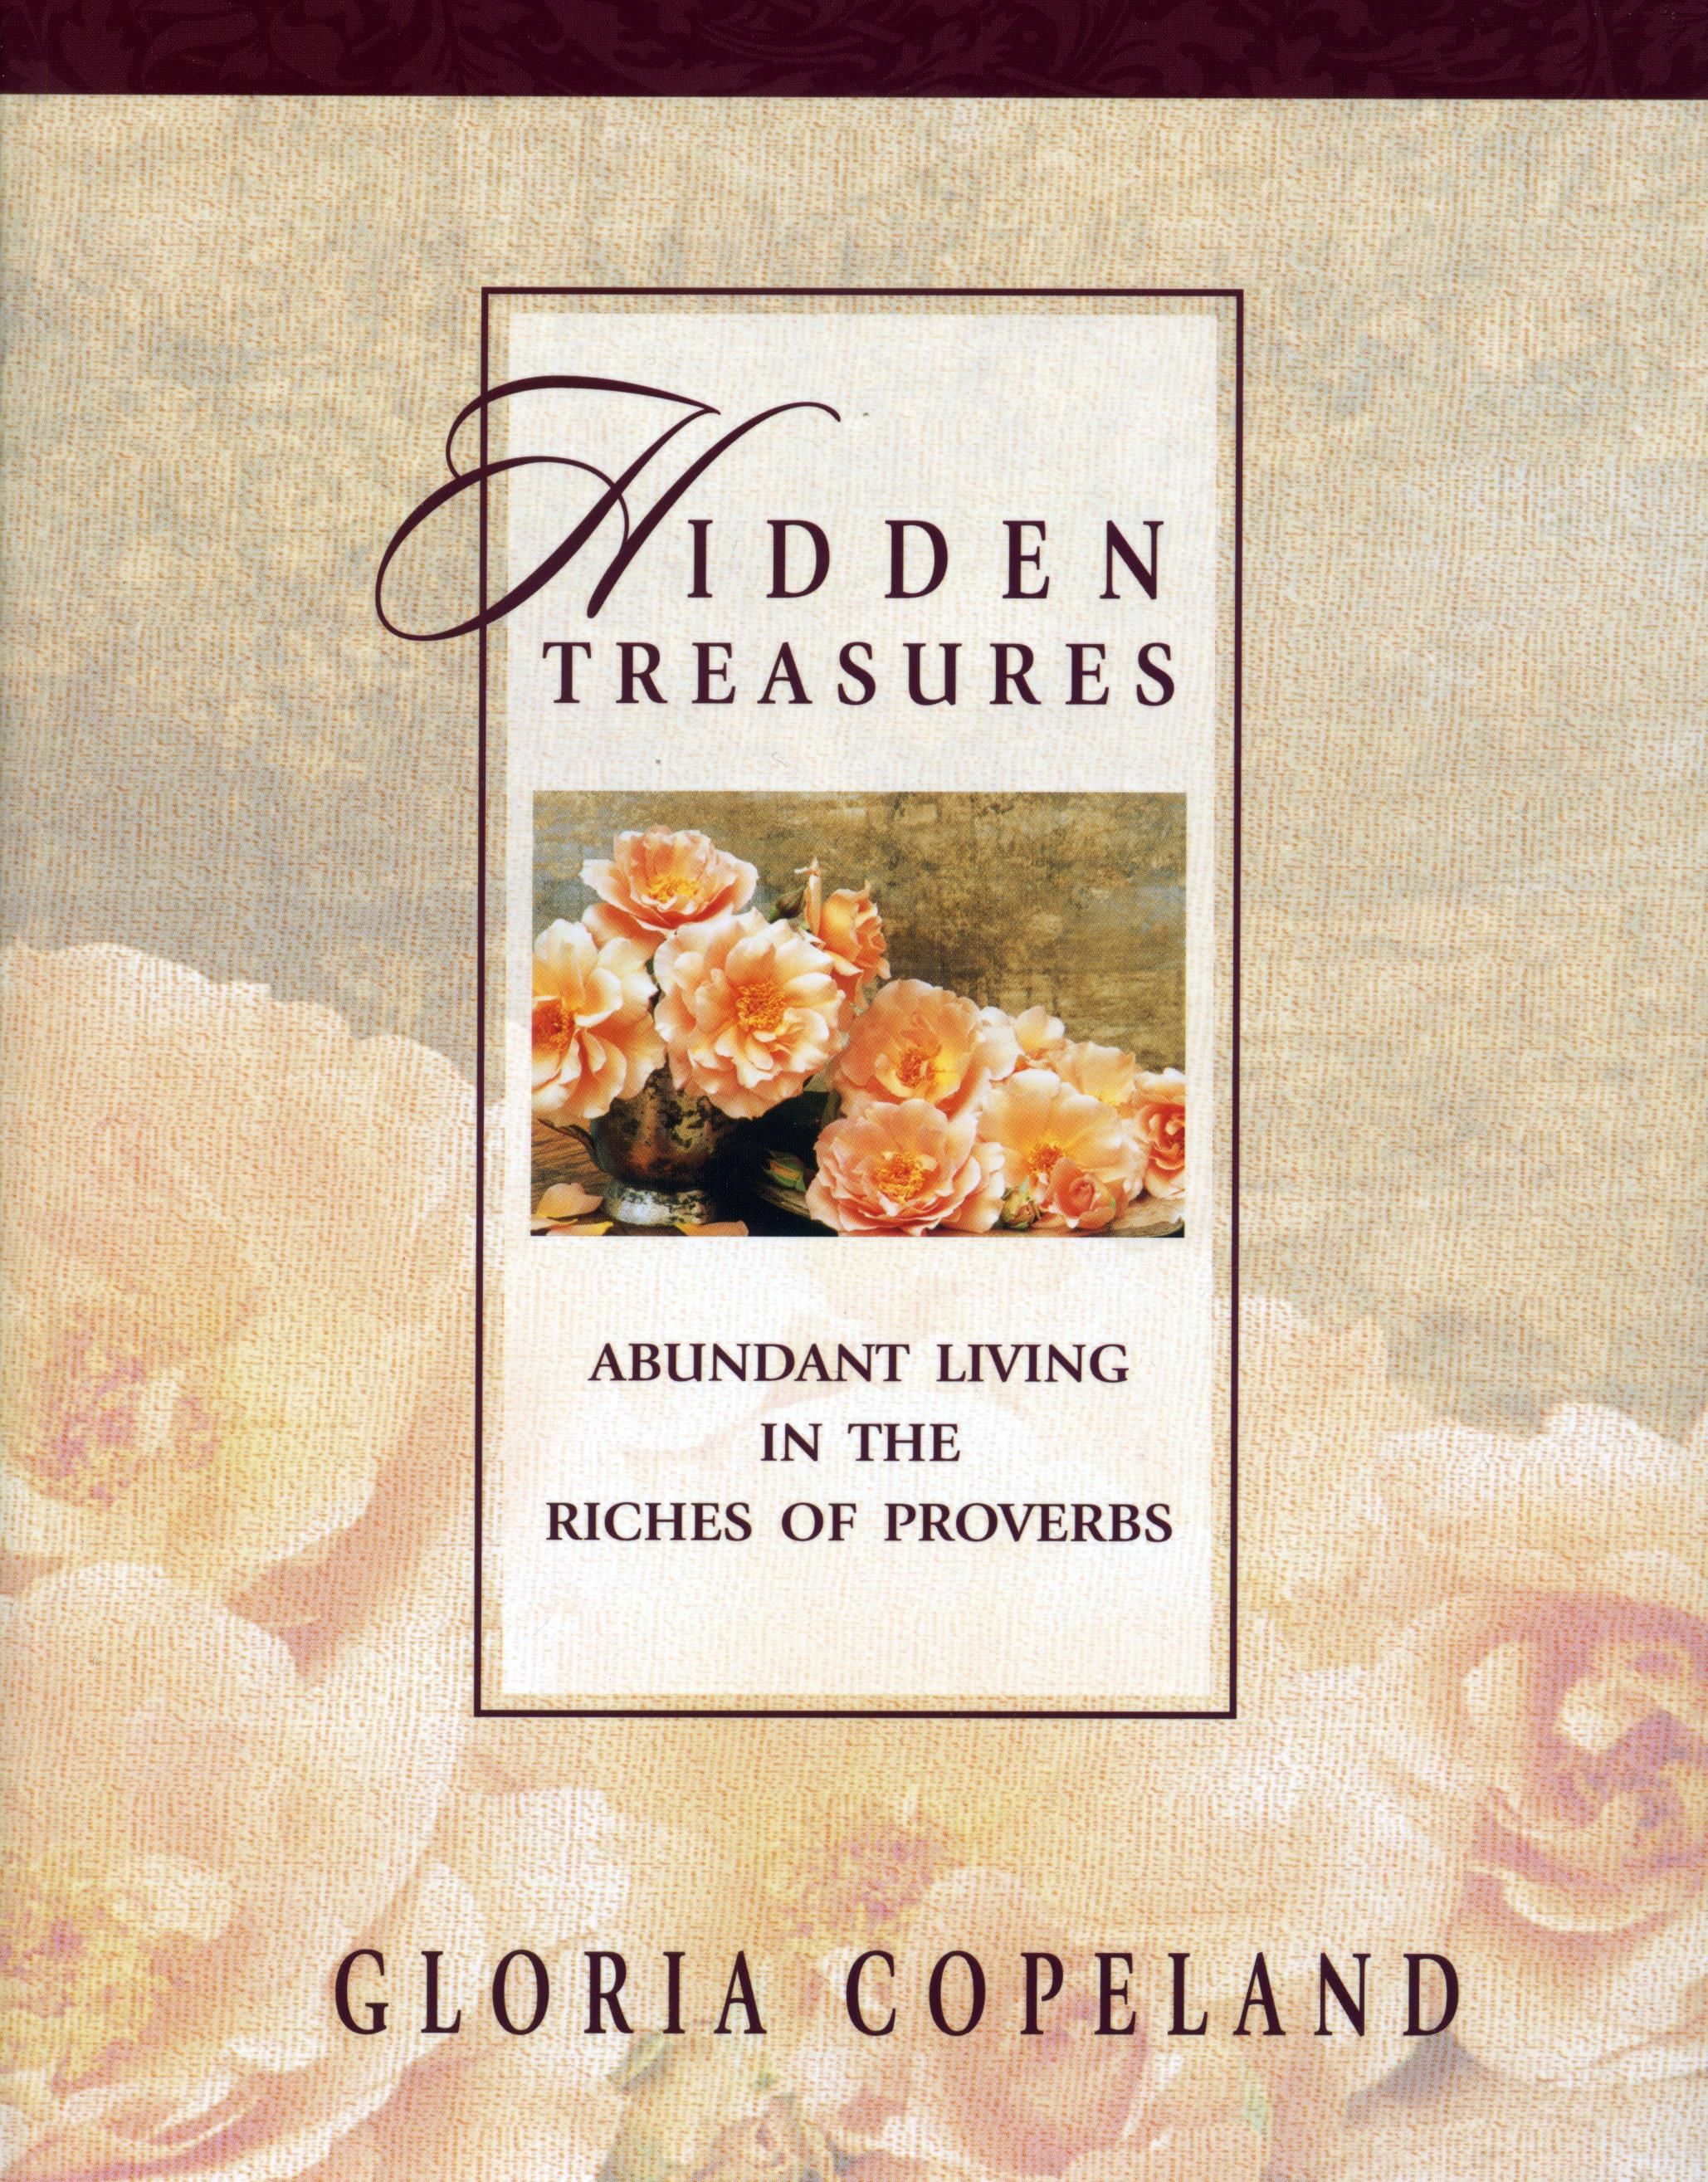 G. Copeland: Hidden Treasures - In the Riches of Proverbs (Hardcover)